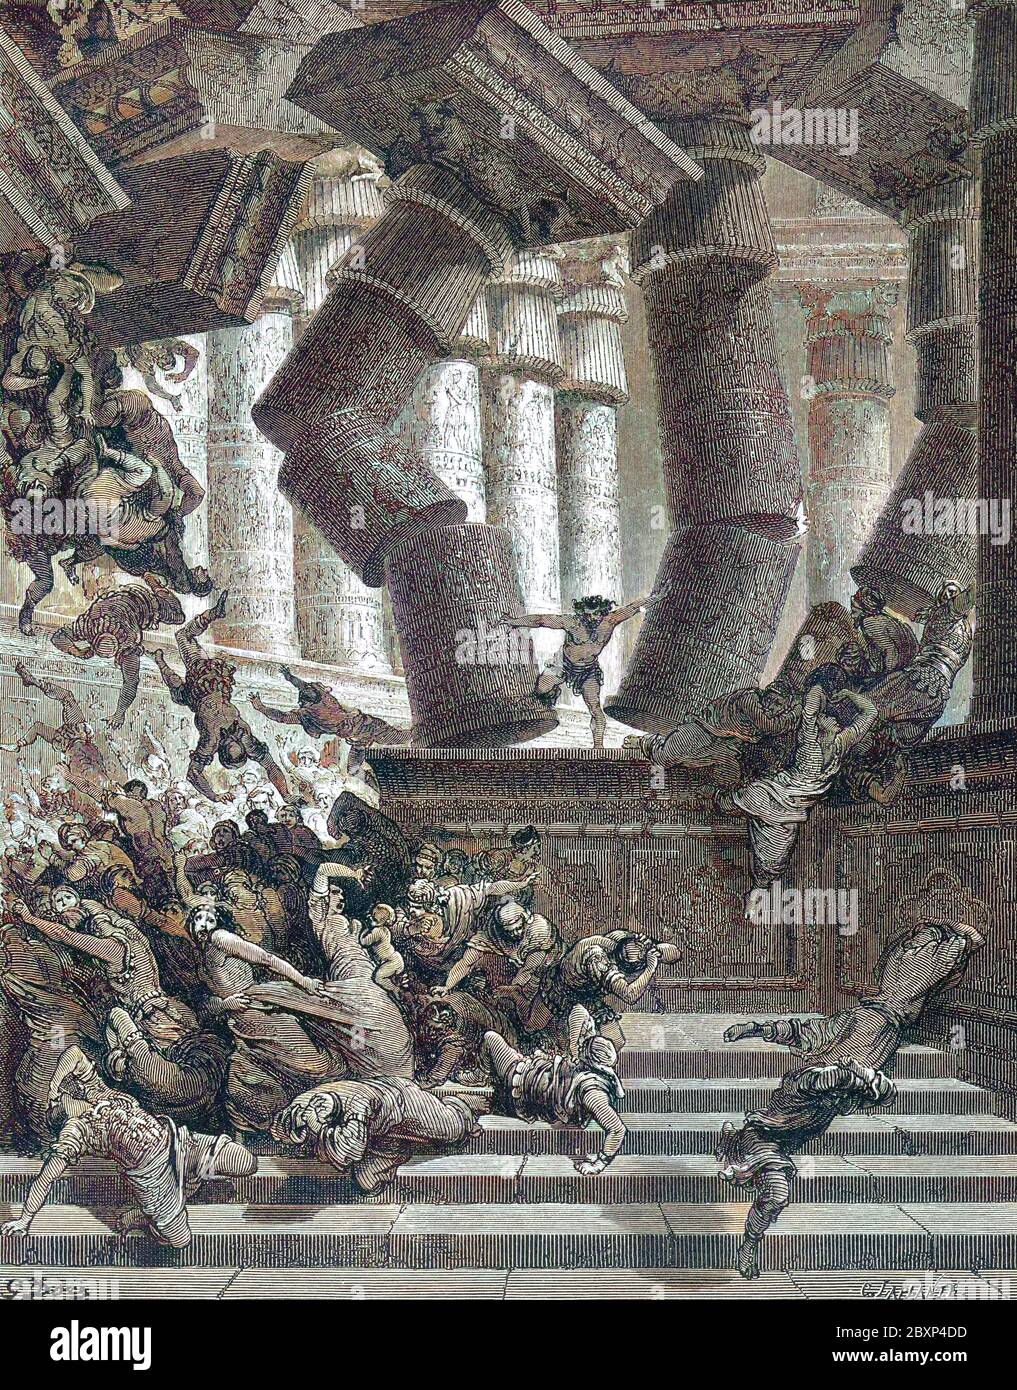 Machine colourized (AI) Death of Samson [Let me die with the Philistines!] Judges 16:30 From the book 'Bible Gallery' Illustrated by Gustave Dore with Memoir of Dore and Descriptive Letter-press by Talbot W. Chambers D.D. Published by Cassell & Company Limited in London and simultaneously by Mame in Tours, France in 1866 Stock Photo